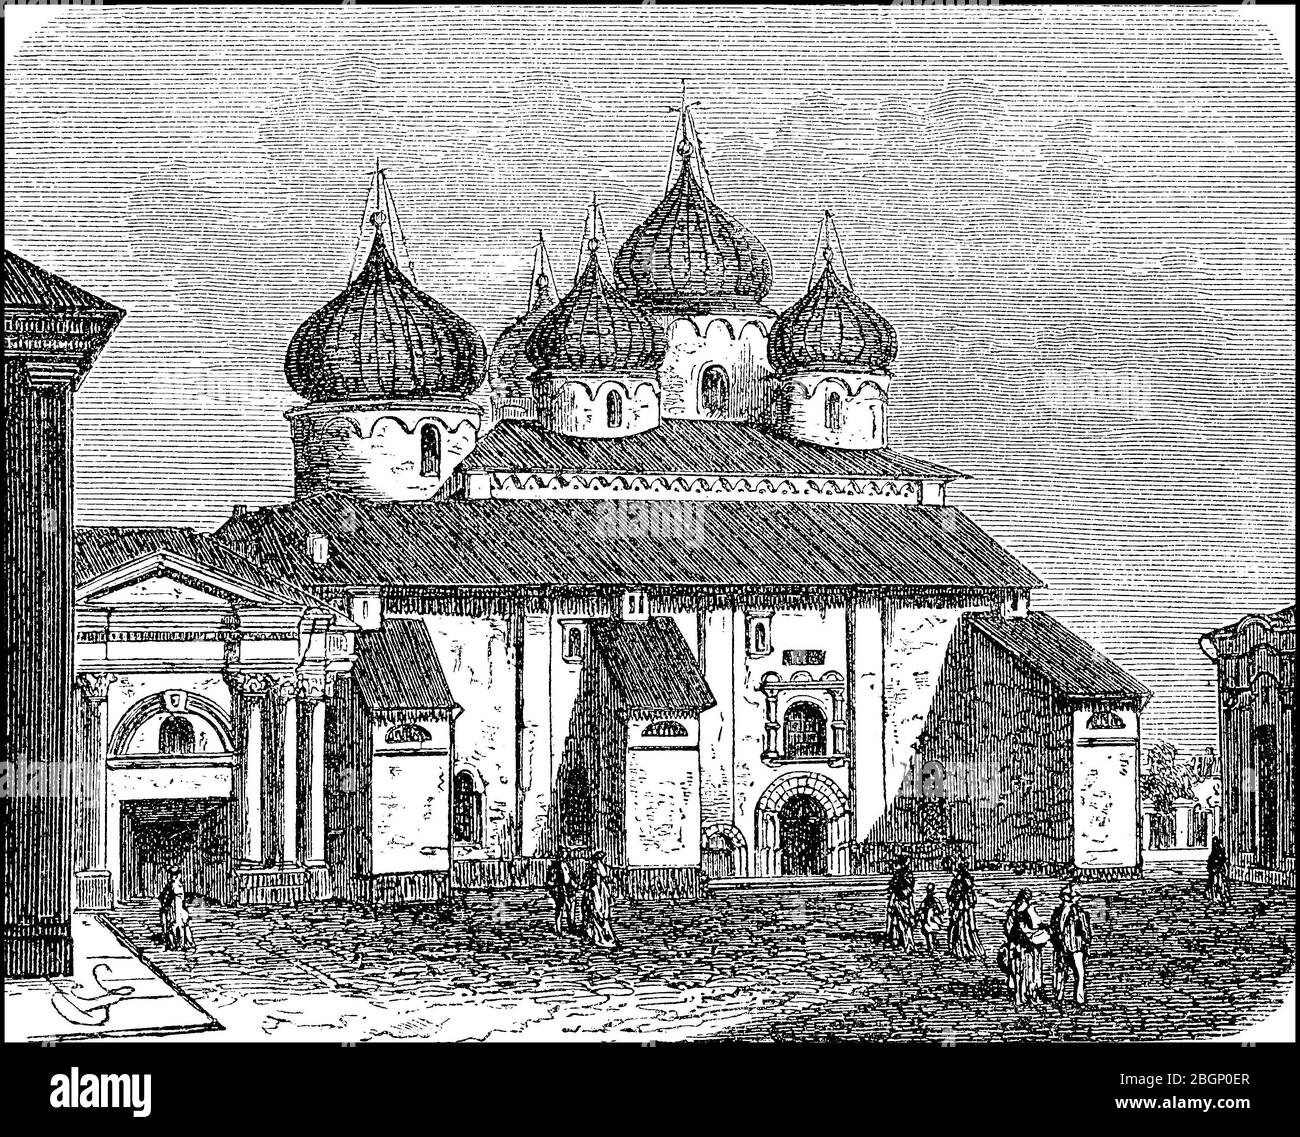 The St. Sophia Church in Novgorod, St. Sophia Cathedral, Russia, here around 1300  /  Die Sophienkirche in Nowgorod, Sophienkathedrale, Russland, hier um 1300, Historisch, historical, digital improved reproduction of an original from the 19th century / digitale Reproduktion einer Originalvorlage aus dem 19. Jahrhundert, Stock Photo